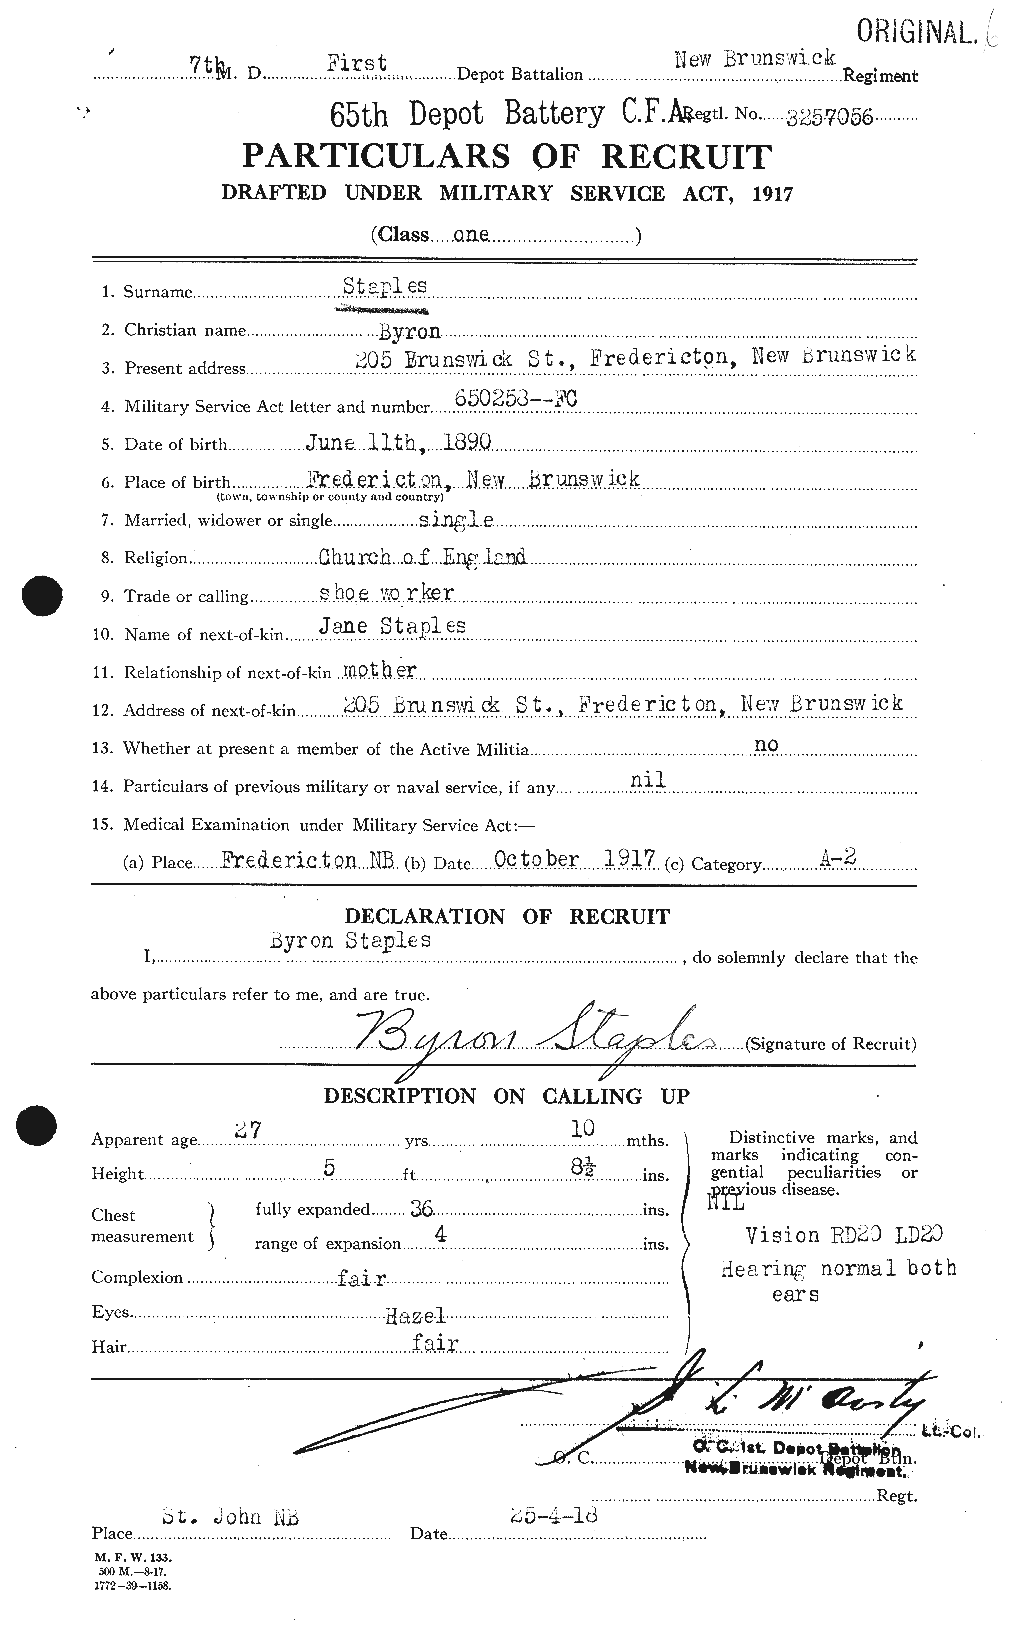 Personnel Records of the First World War - CEF 114199a